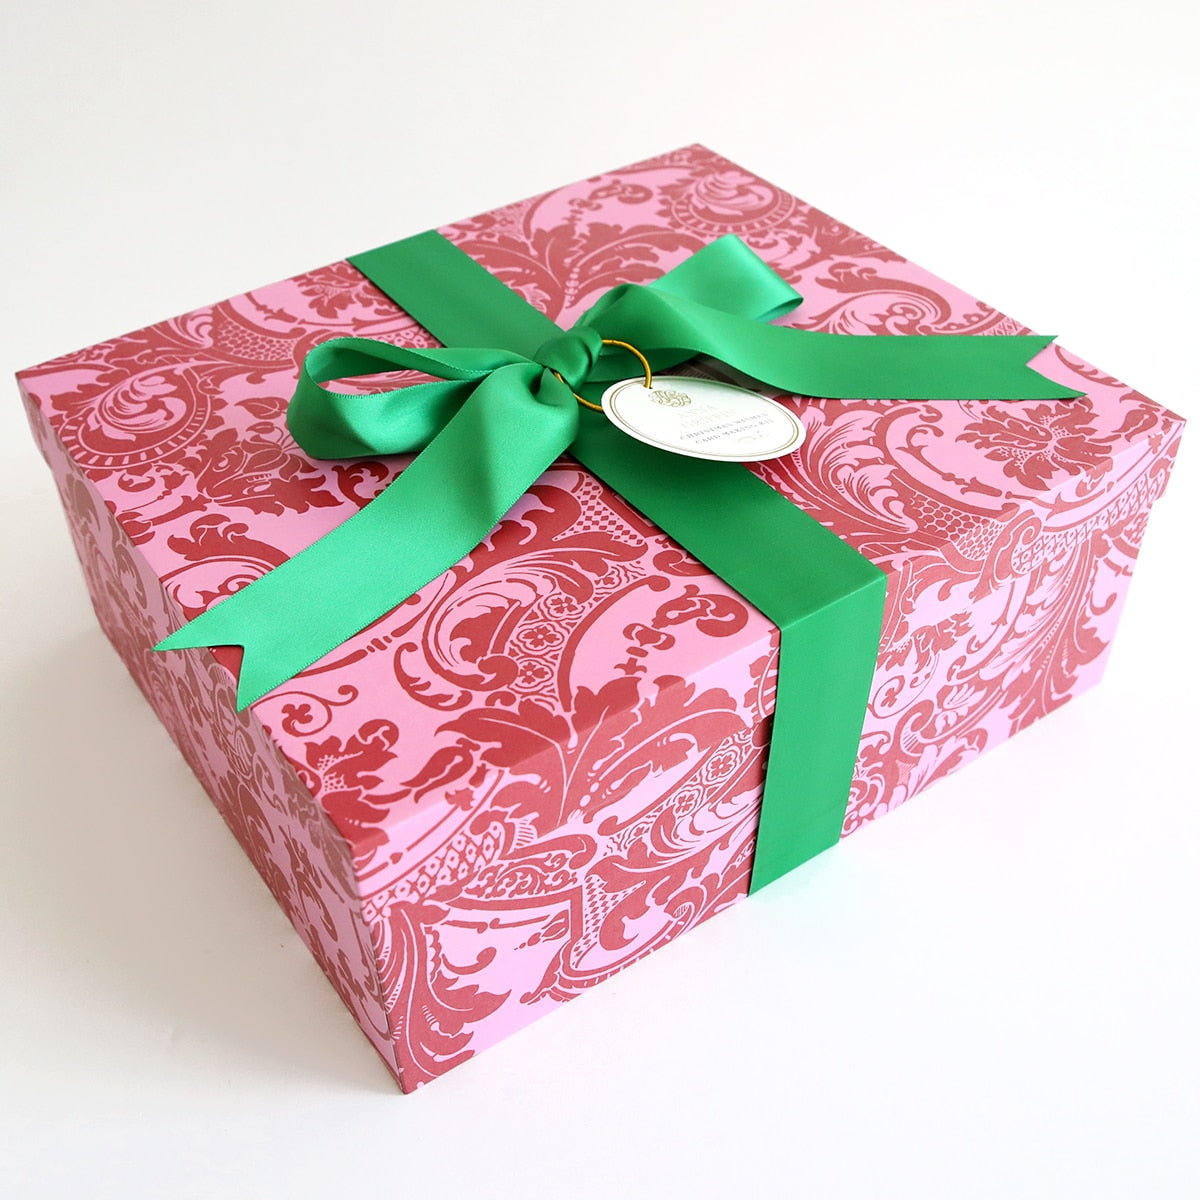 A pink and green Christmas Wishes Card Making Kit with a green ribbon.